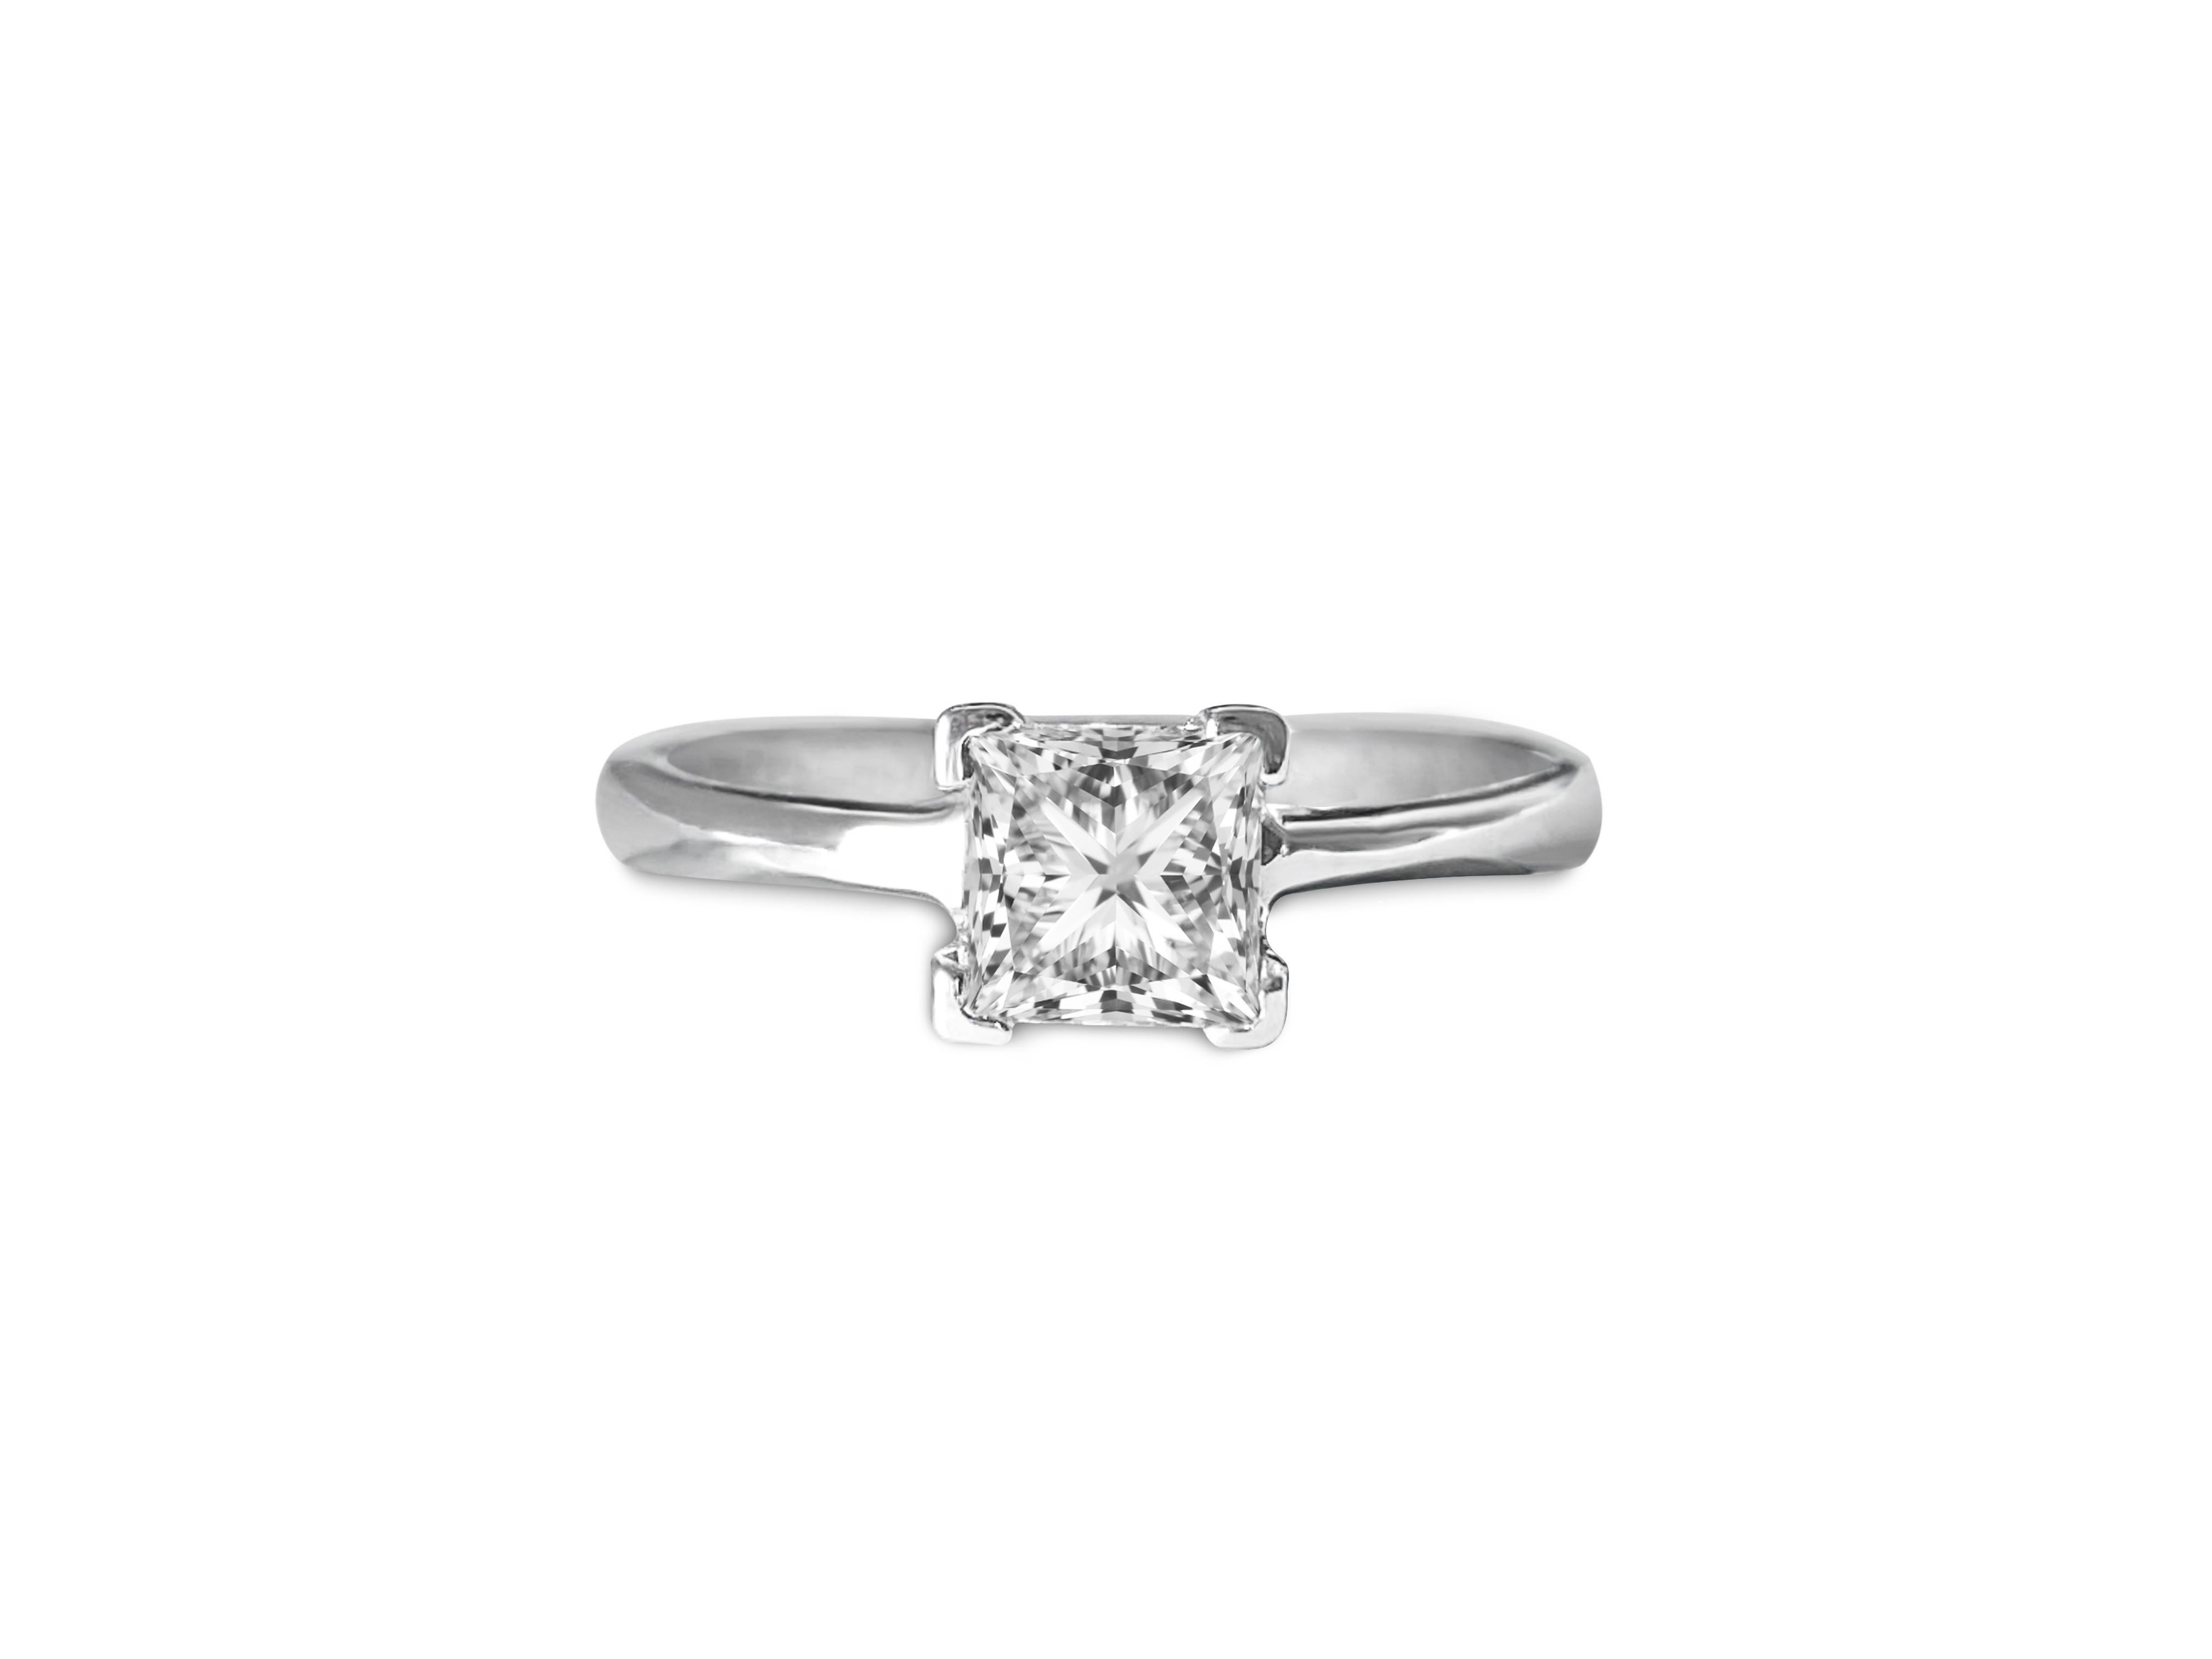 Brilliant Cut 1.00 Carat Diamond Engagement Ring in 14K Gold For Sale